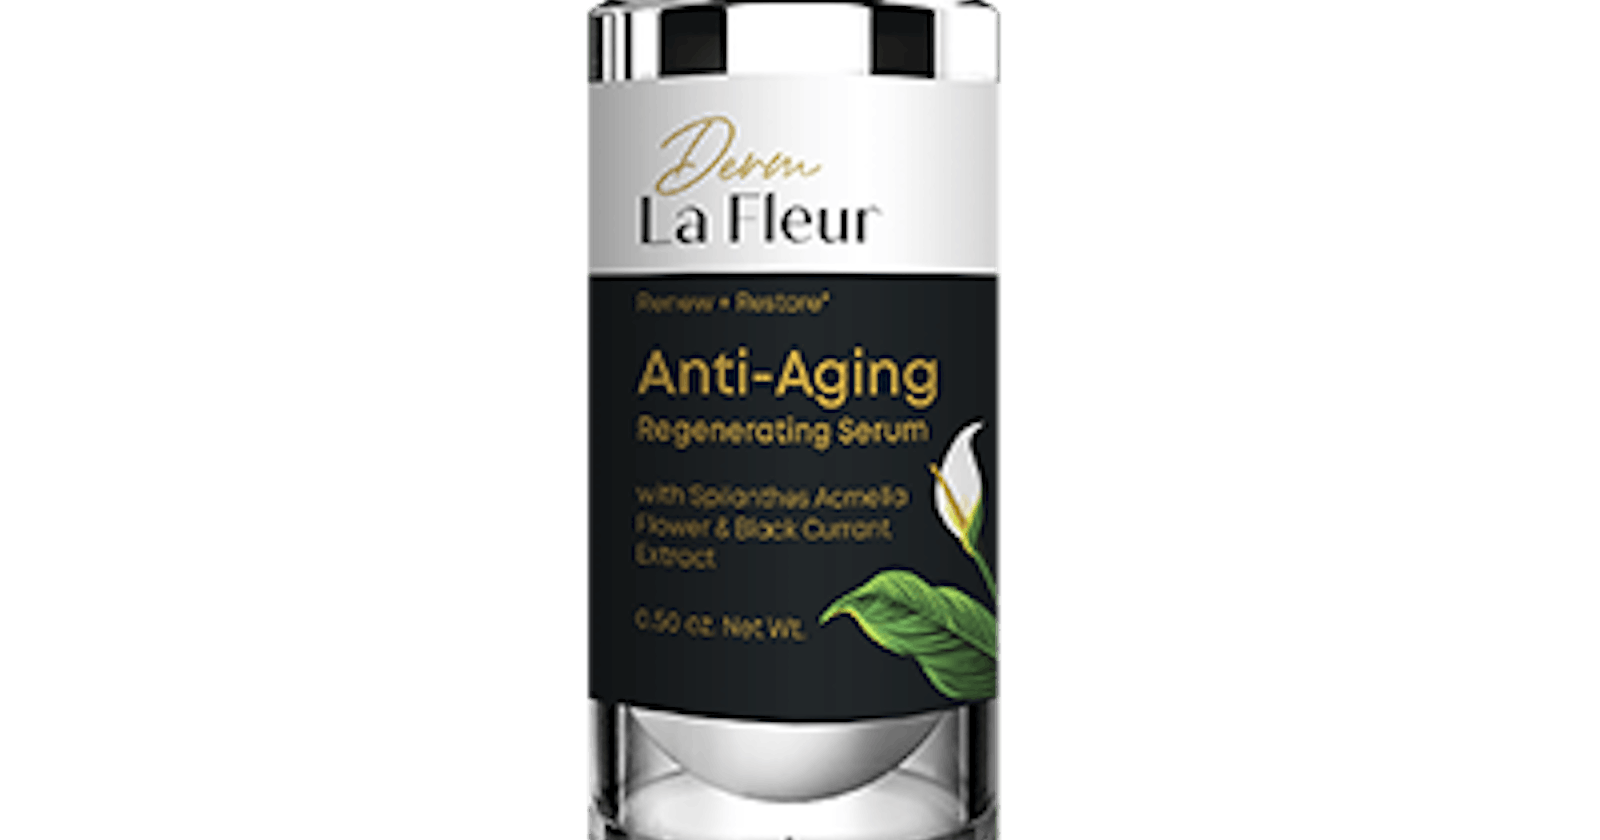 Derm La Fleur Anti Aging Serum: (Pros and Cons) Is It Scam Or Trusted?